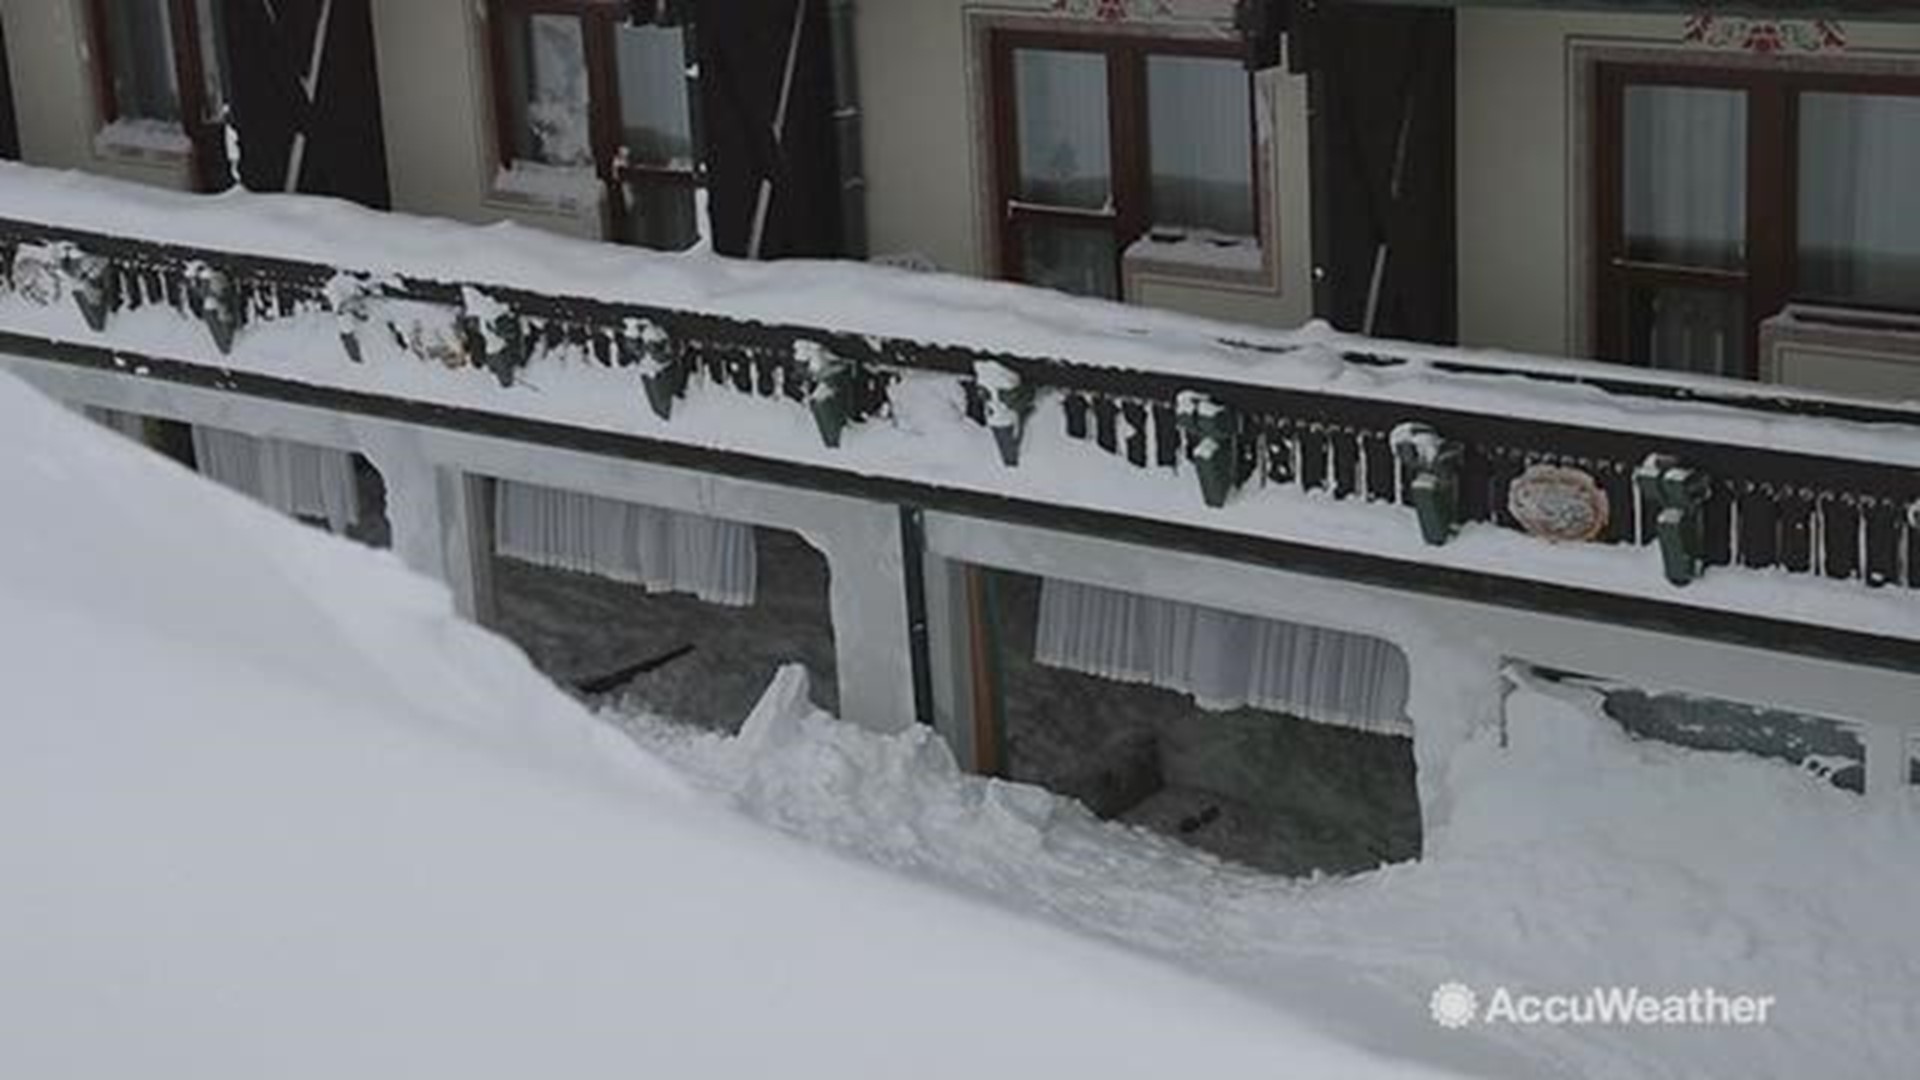 An avalanche buried this hotel in Ramsau, Austria, in the middle of the night on January 15.